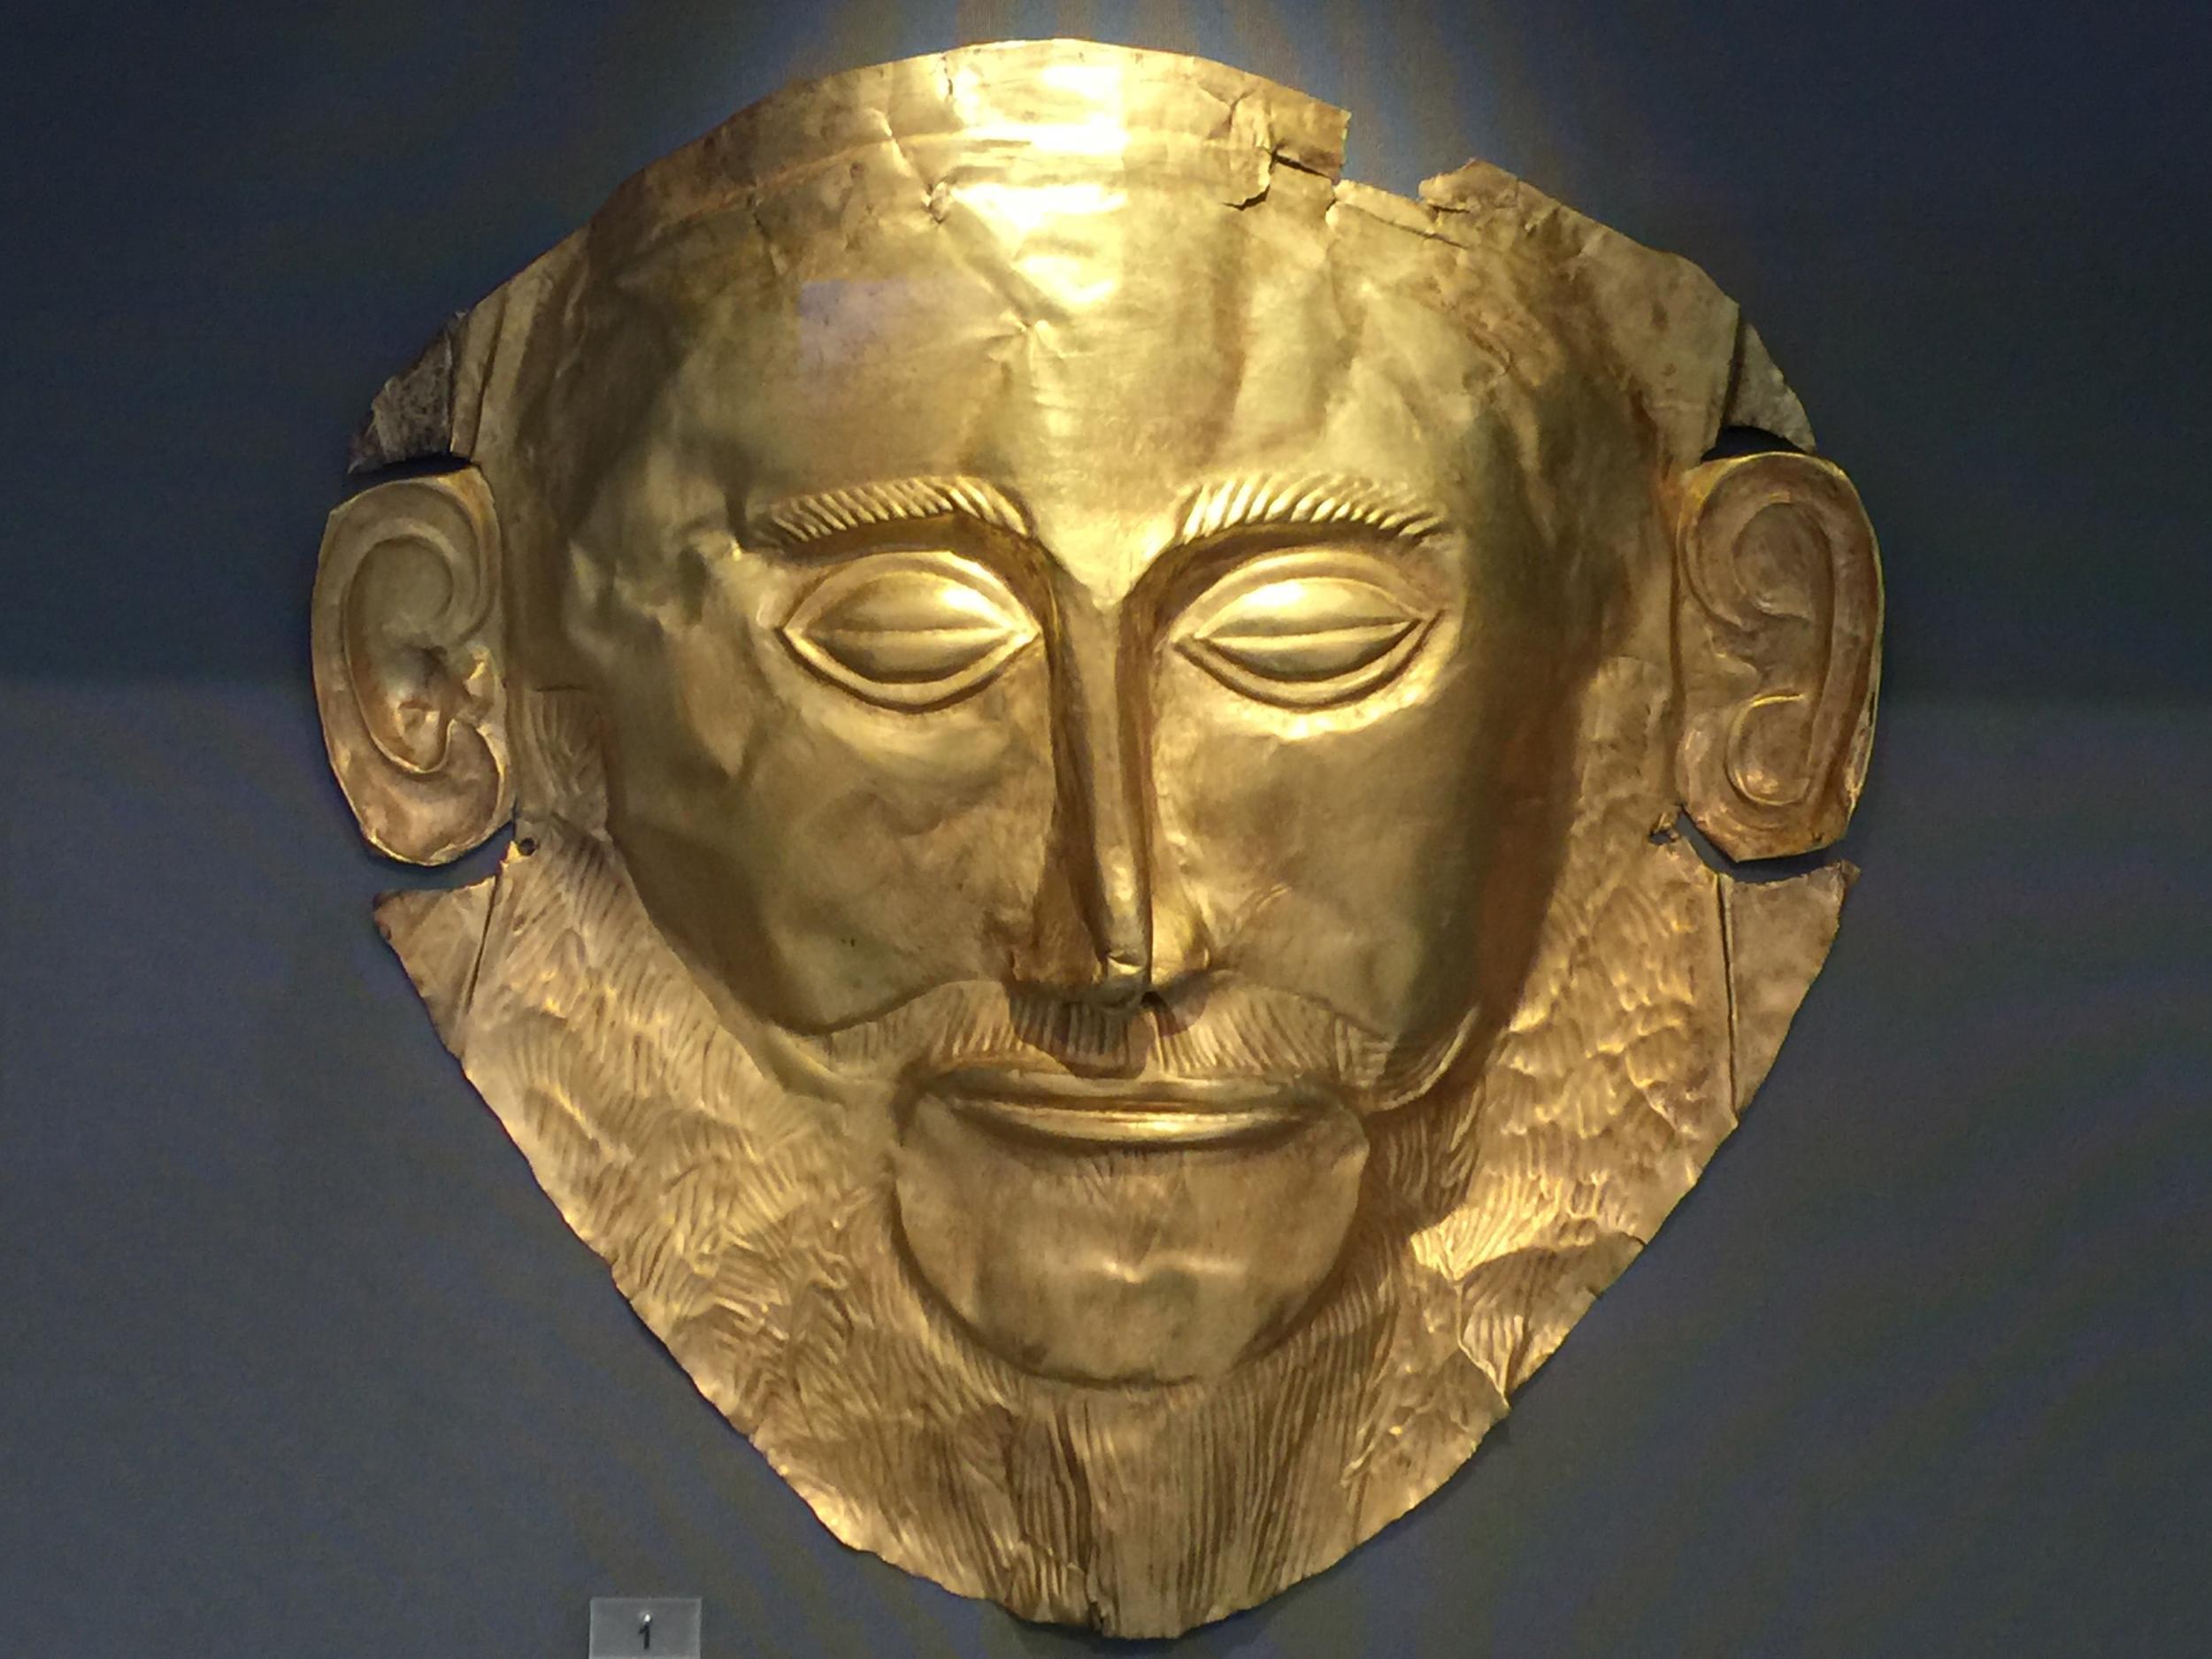 This golden death mask was discovered in the ruins of ancient Mycenae in 1876 by Heinrich Schliemann after he went looking for the palace of Agamemnon, a central figure in the Trojan War. It has since dated the mask to an even earlier period